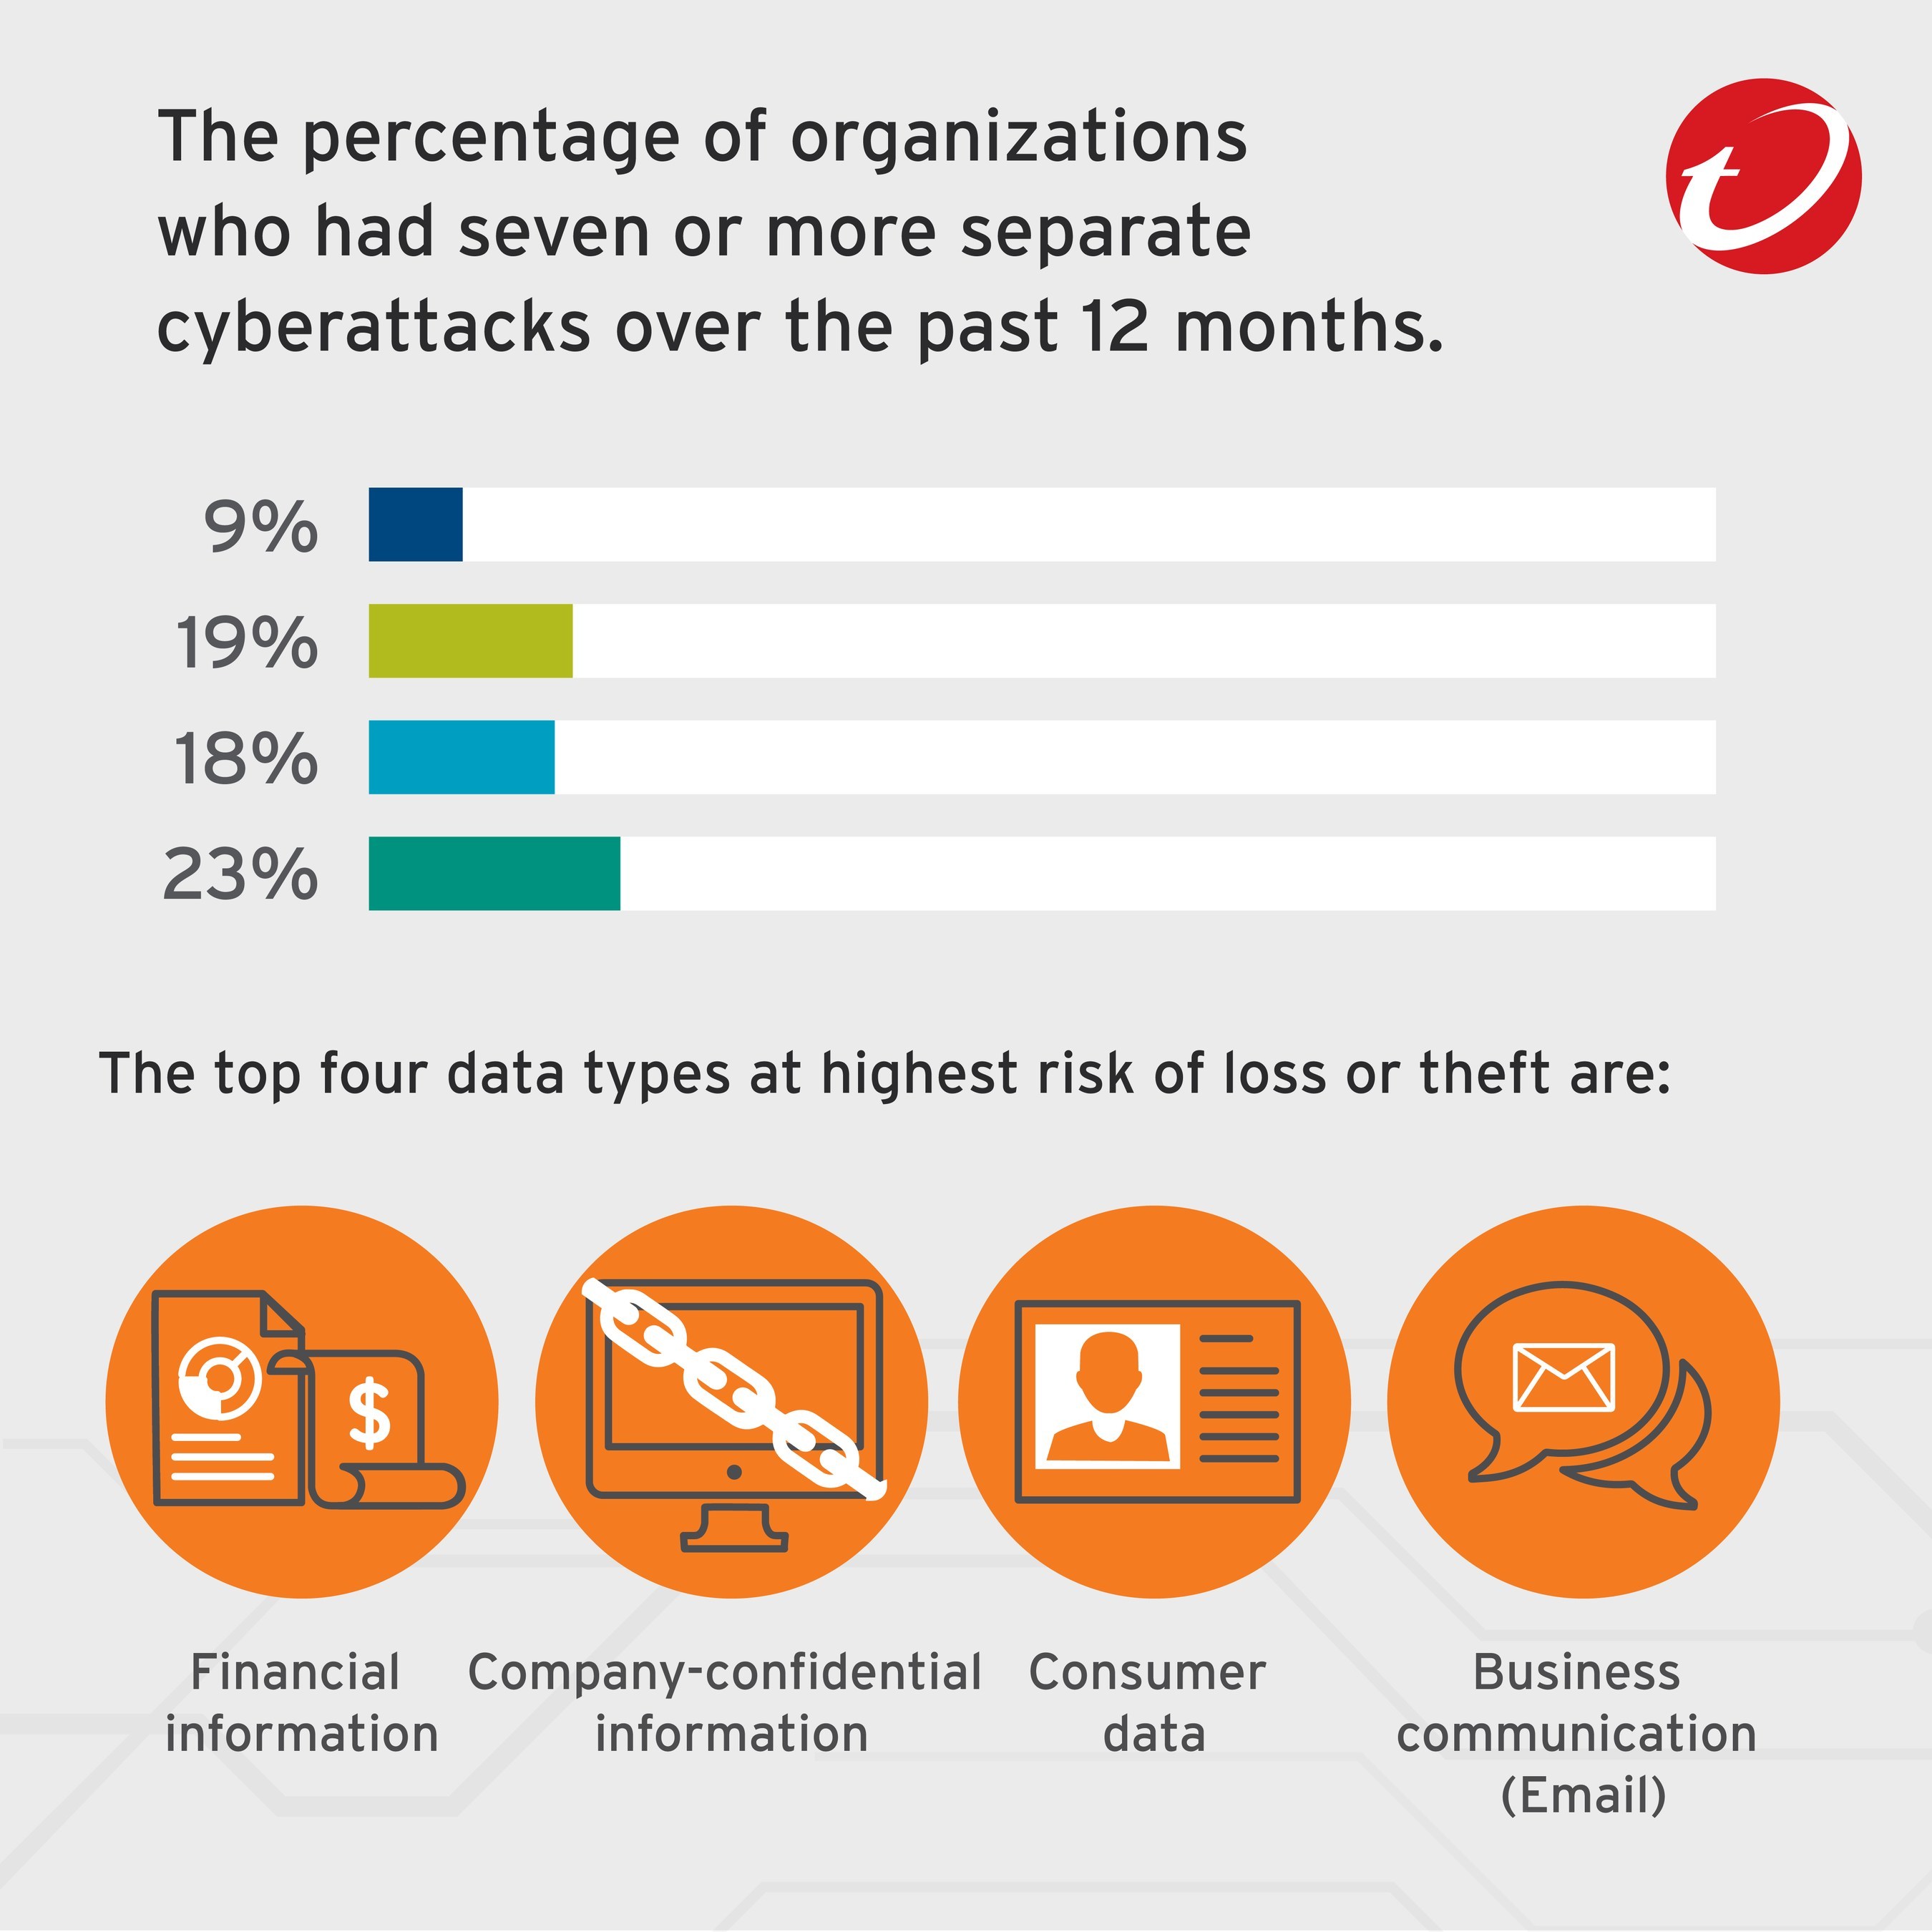 A Quarter of Global Organizations Were Hit by Seven or More Cyber